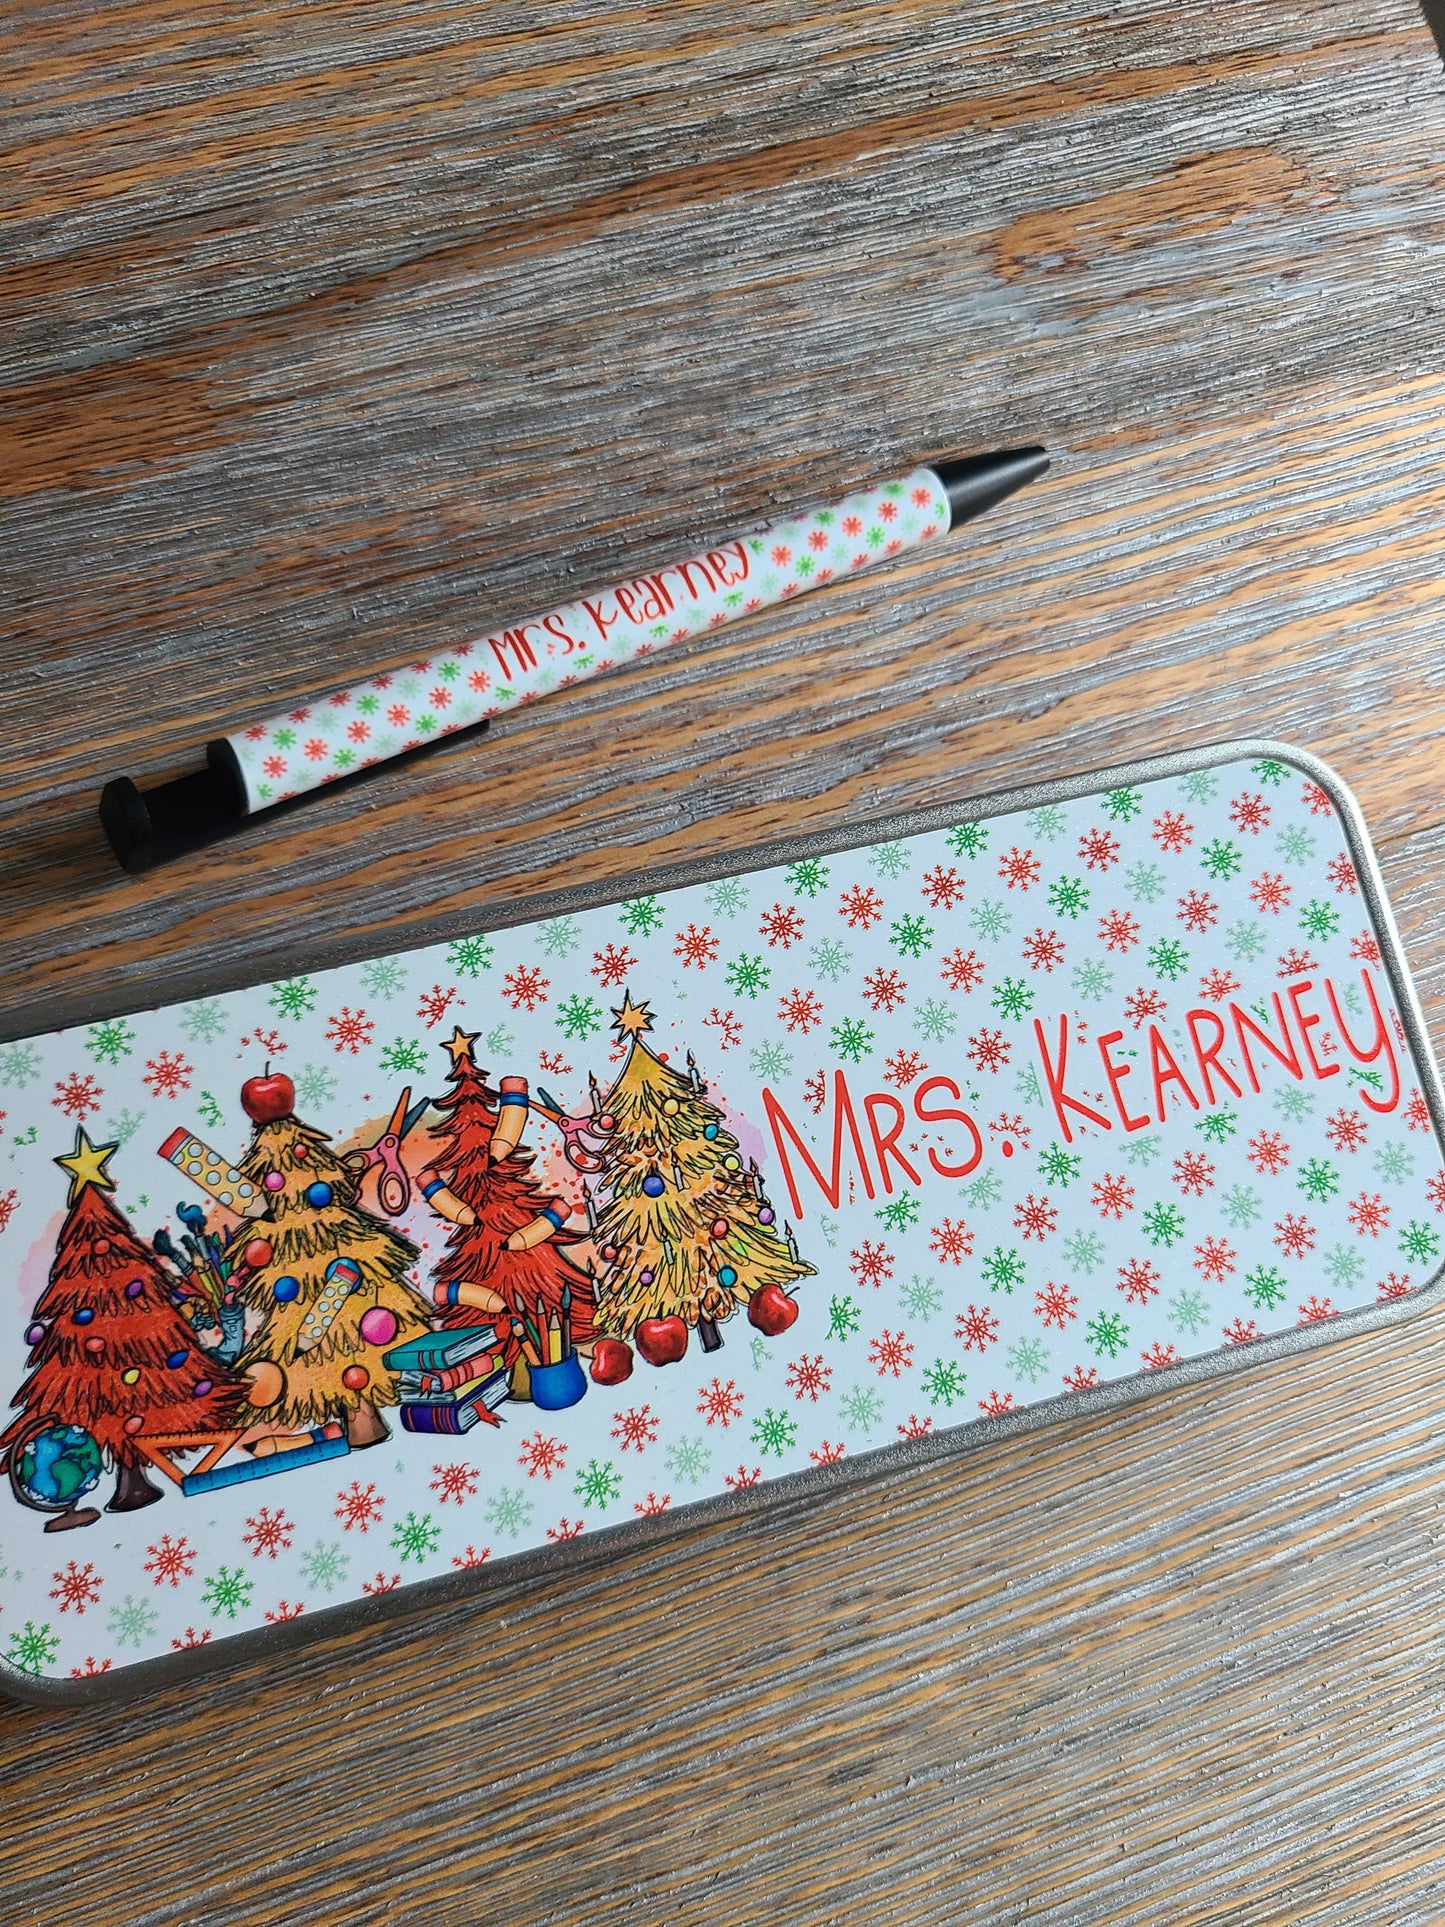 Christmas Teacher Pencil Tin Gift Card Holders Personalized